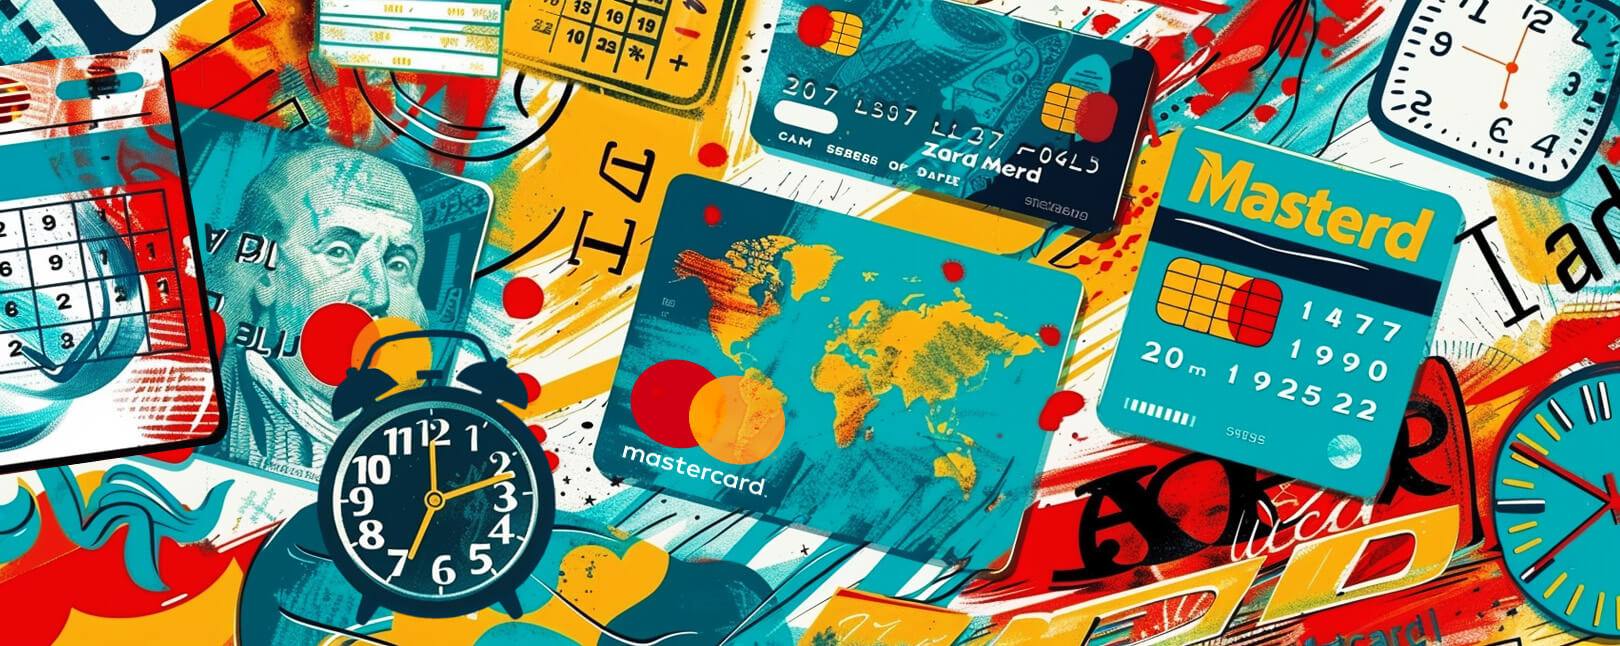 How Mastercard Chargebacks Work: Fees, Time Limits & More